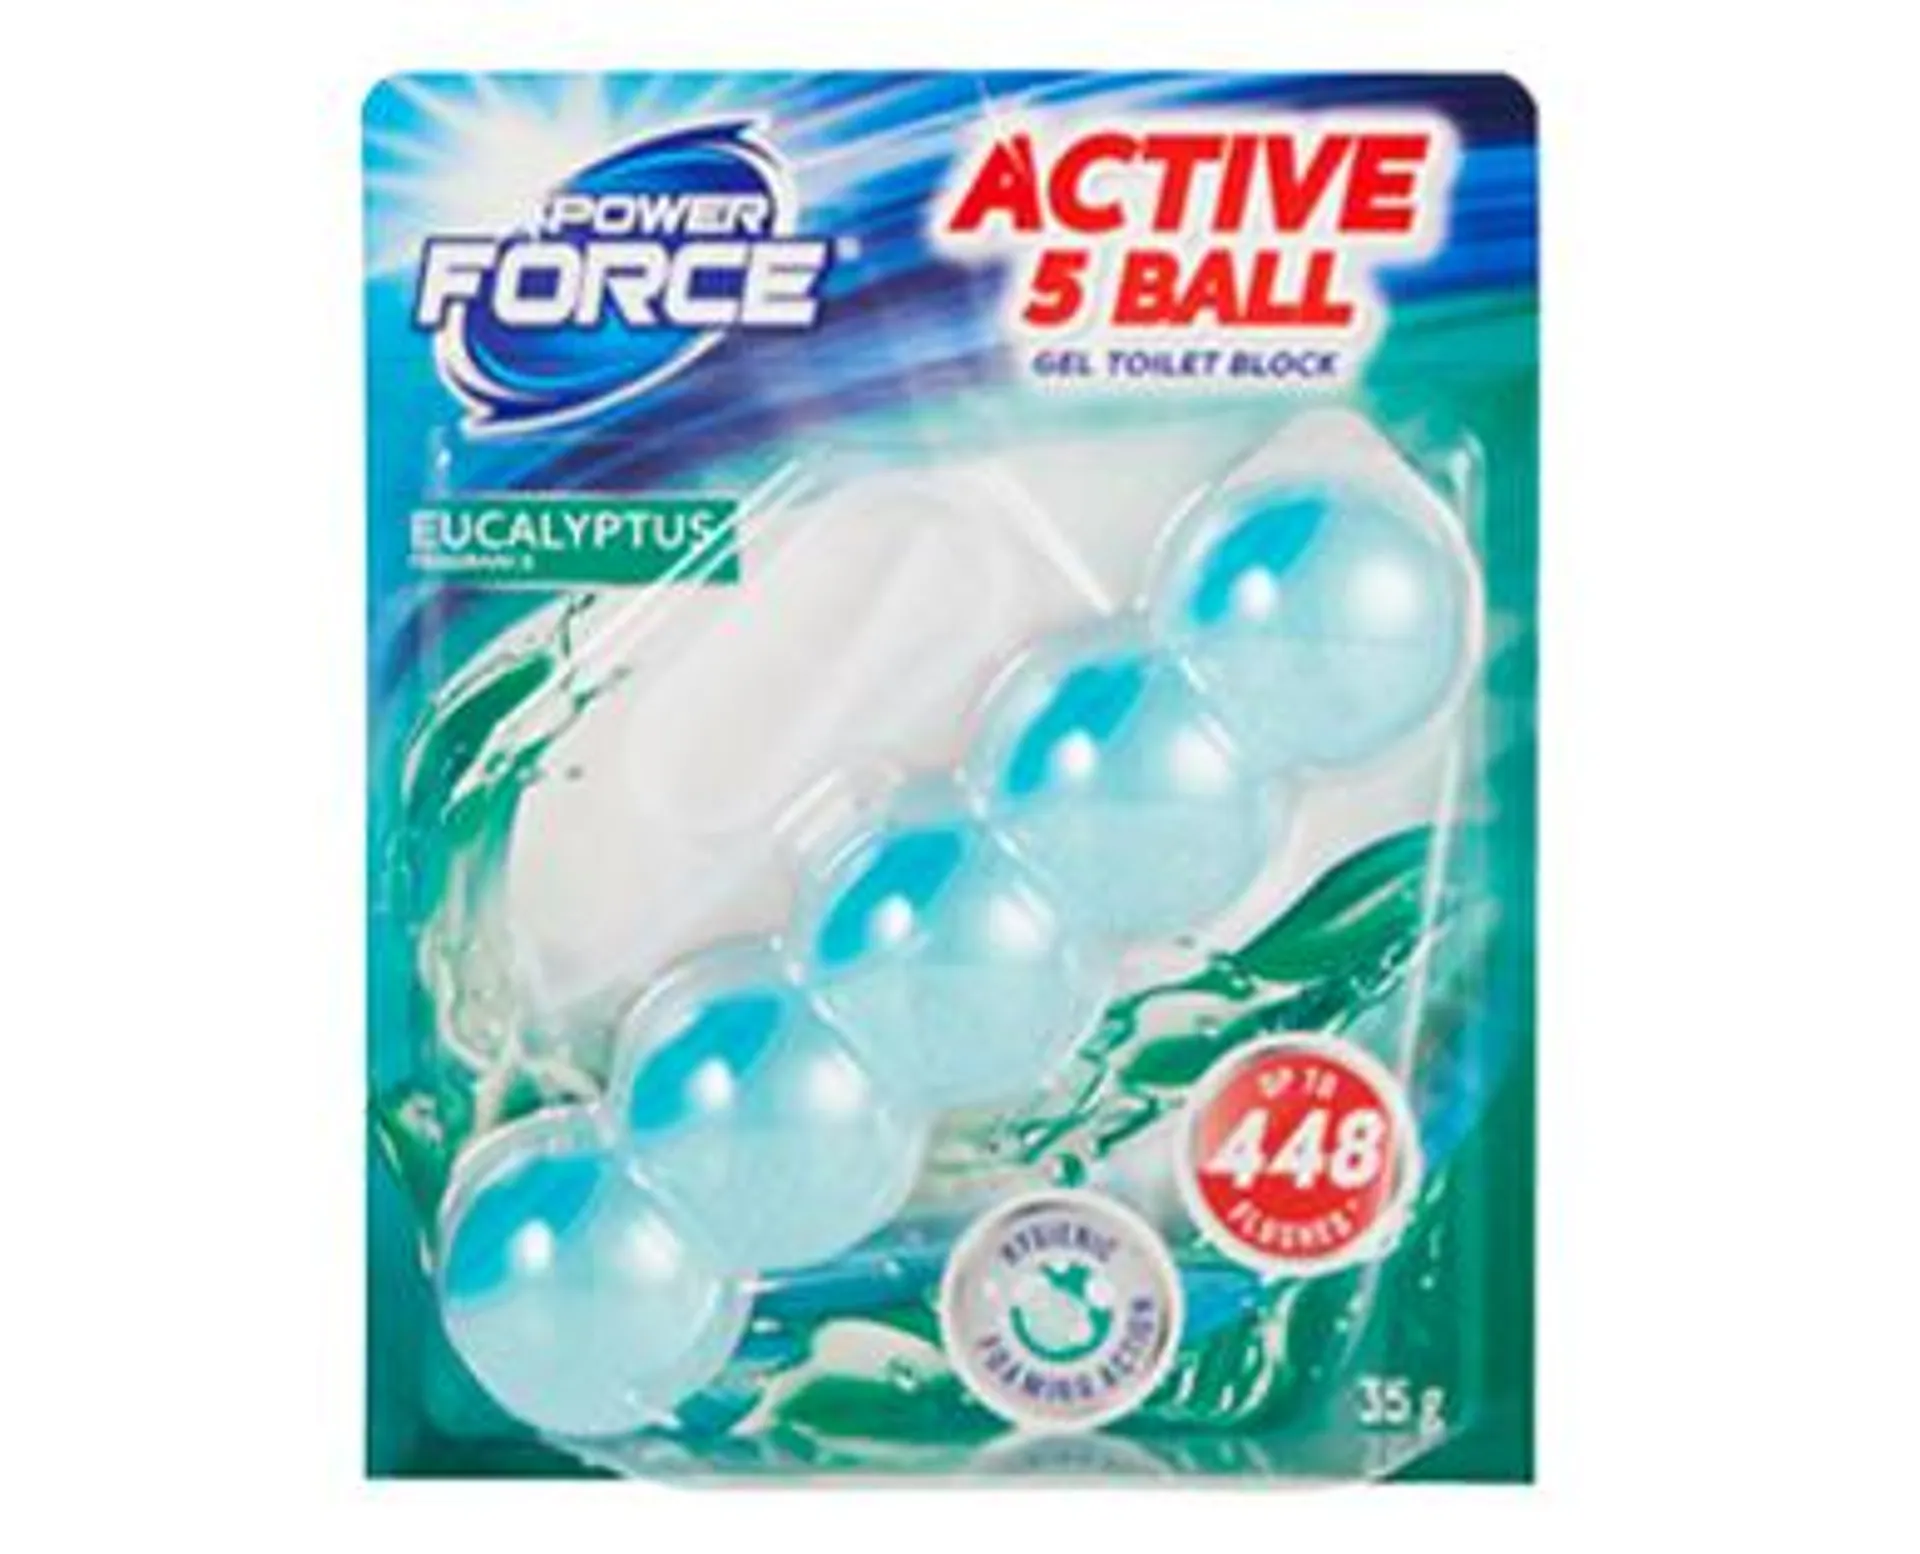 Power Force Active 5 Ball 35g